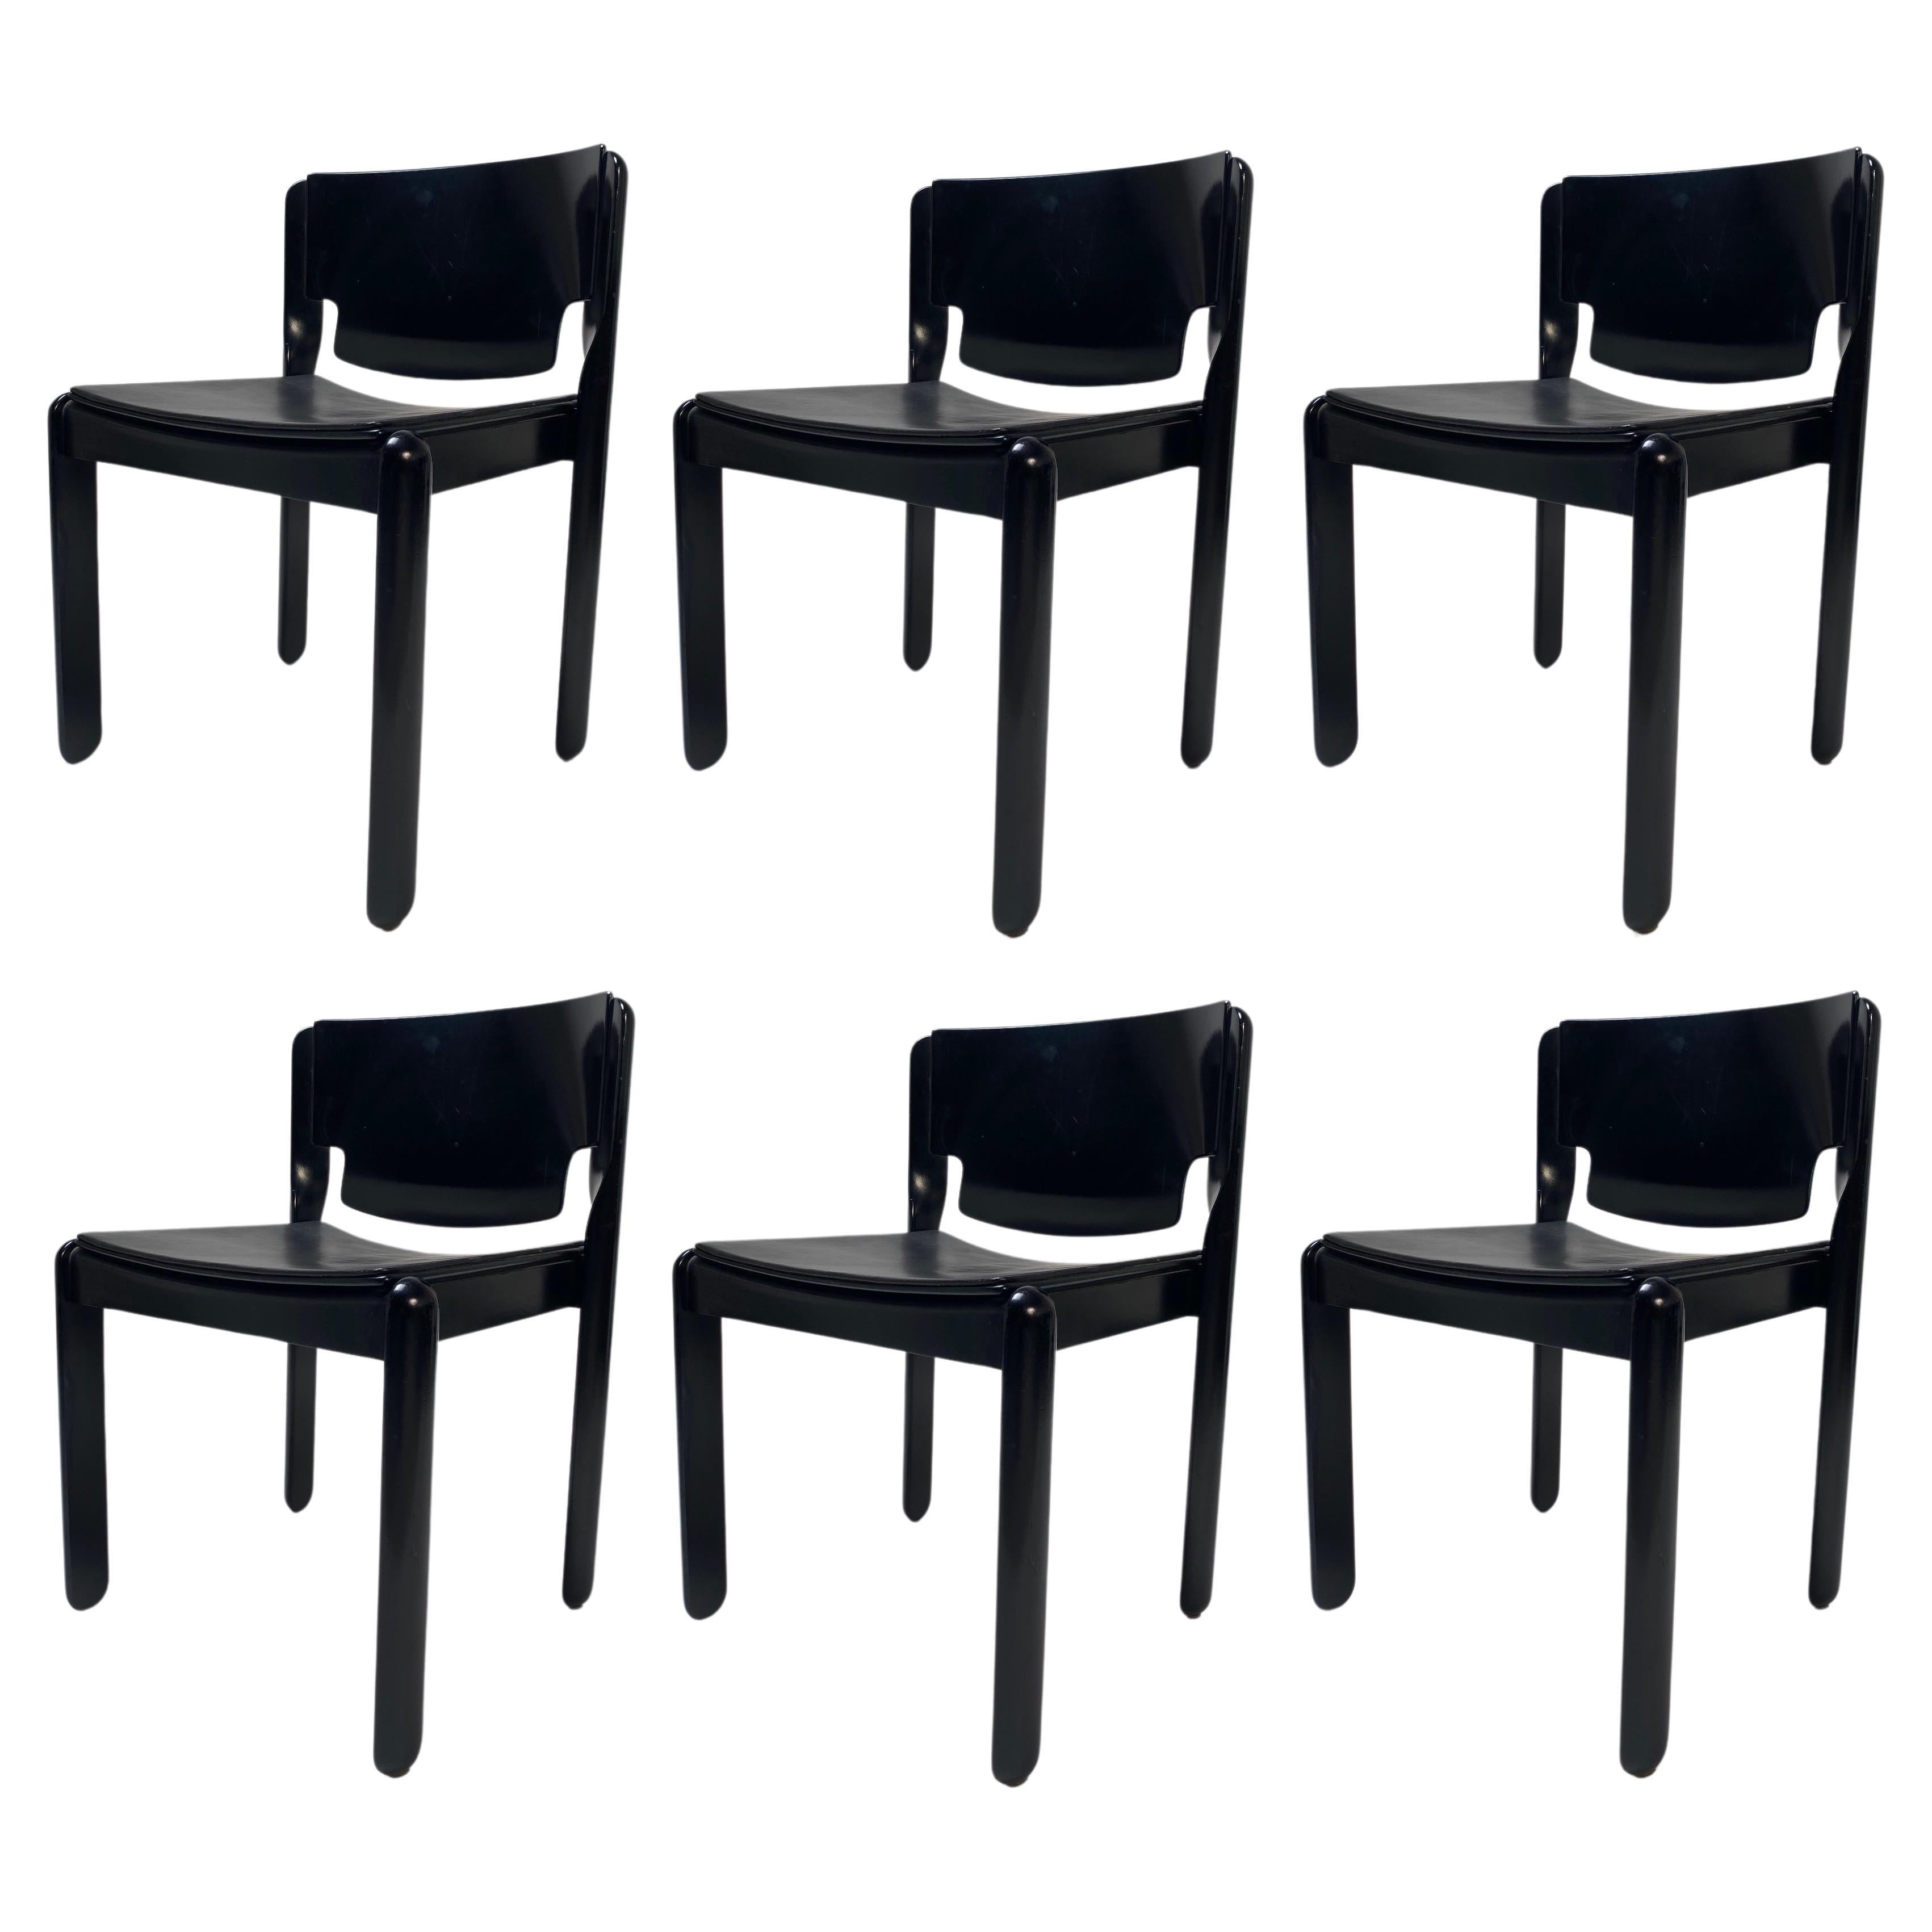 Set of 6 "122" Chairs by Vico Magistretti for Cassina, Italy, 1960s